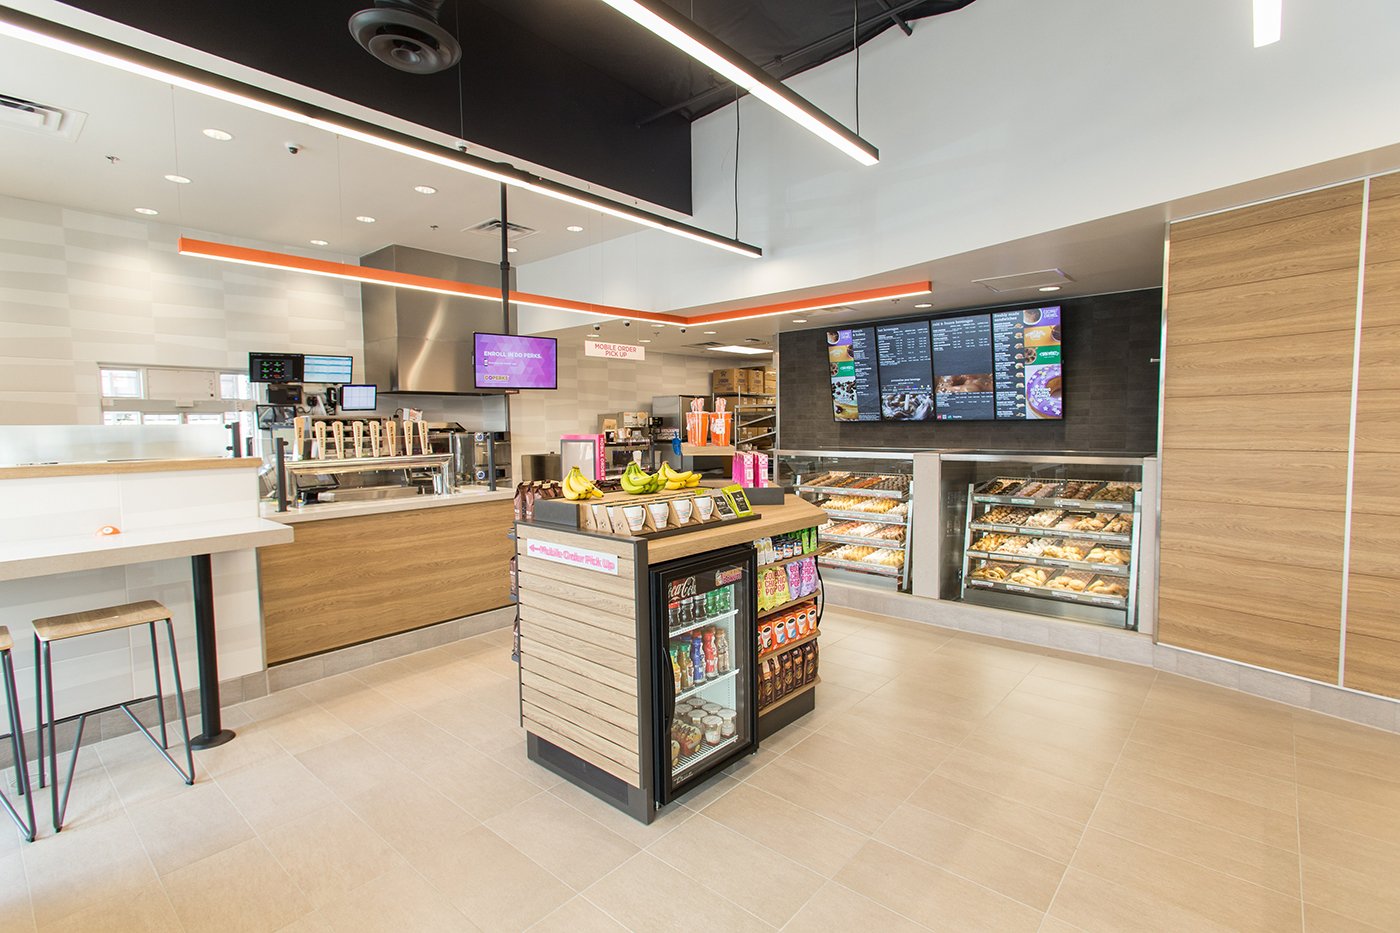 A modern, well-lit coffee and donuts franchise with a counter, digital menu screens, a central island displaying snacks and beverages, and shelves with baked goods. The seating area features high stools and tables.